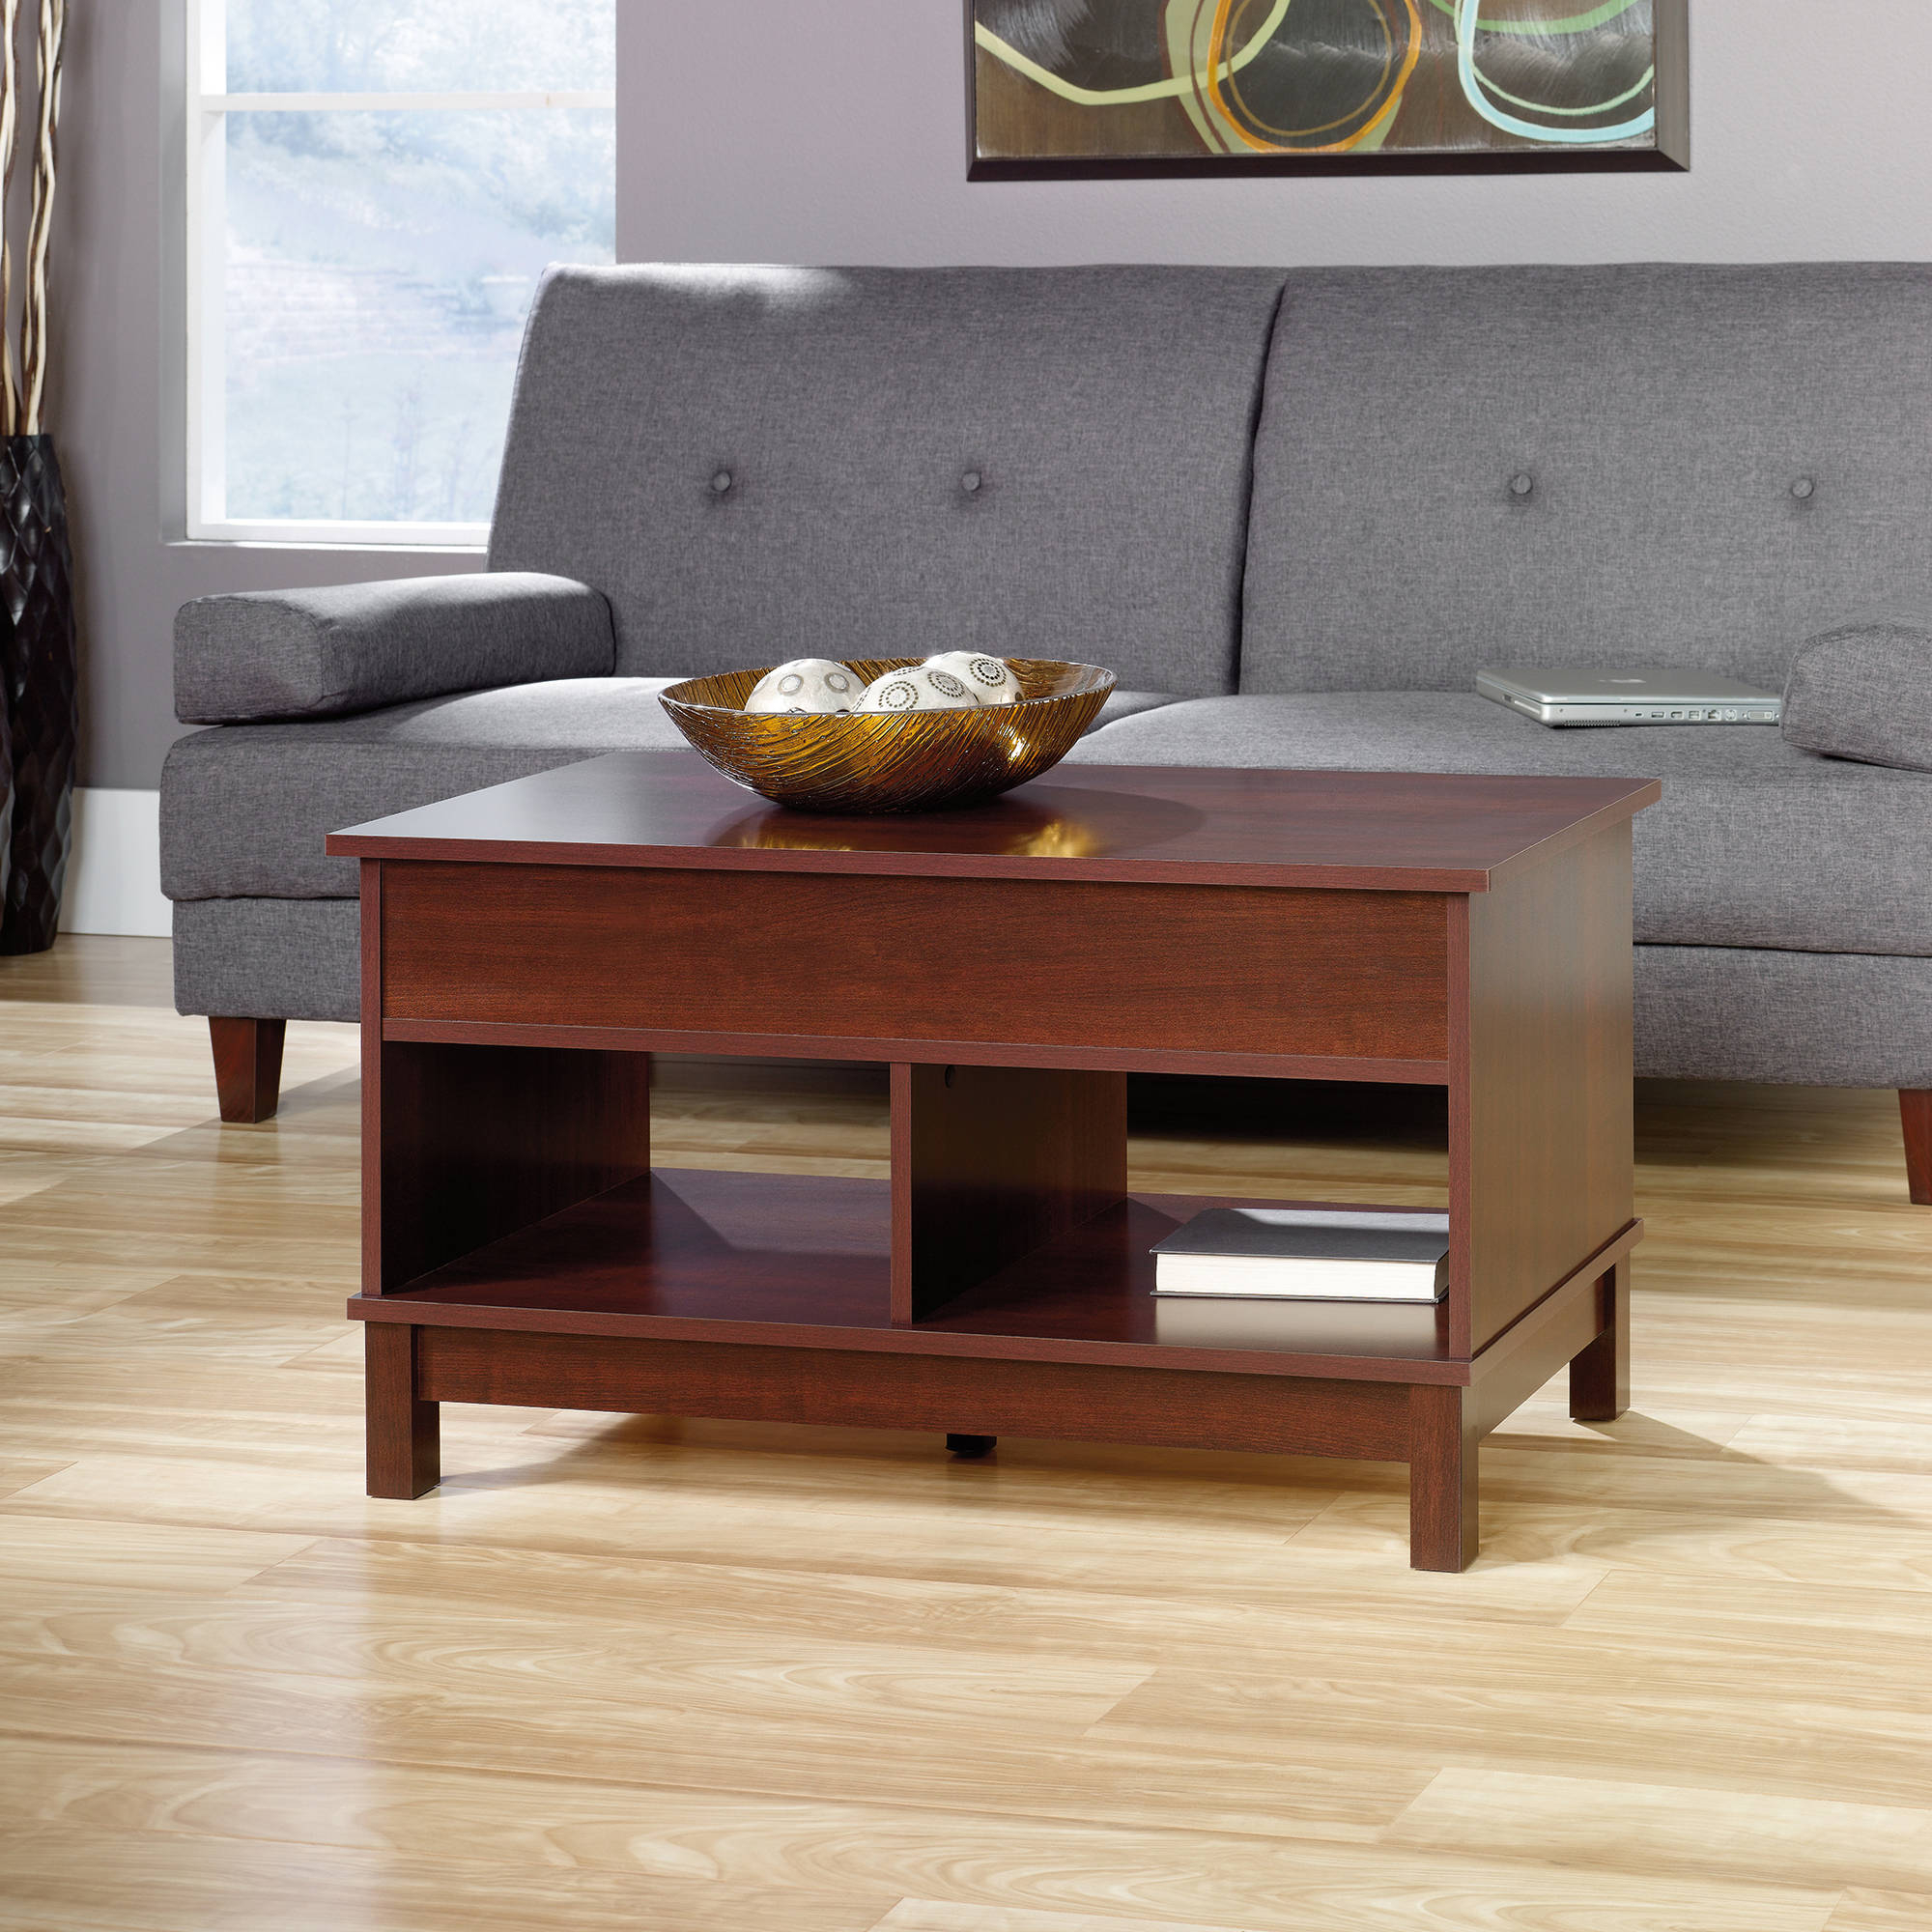 Better Homes Gardens Ashwood Road Coffee Table Cherry Finish for size 2000 X 2000